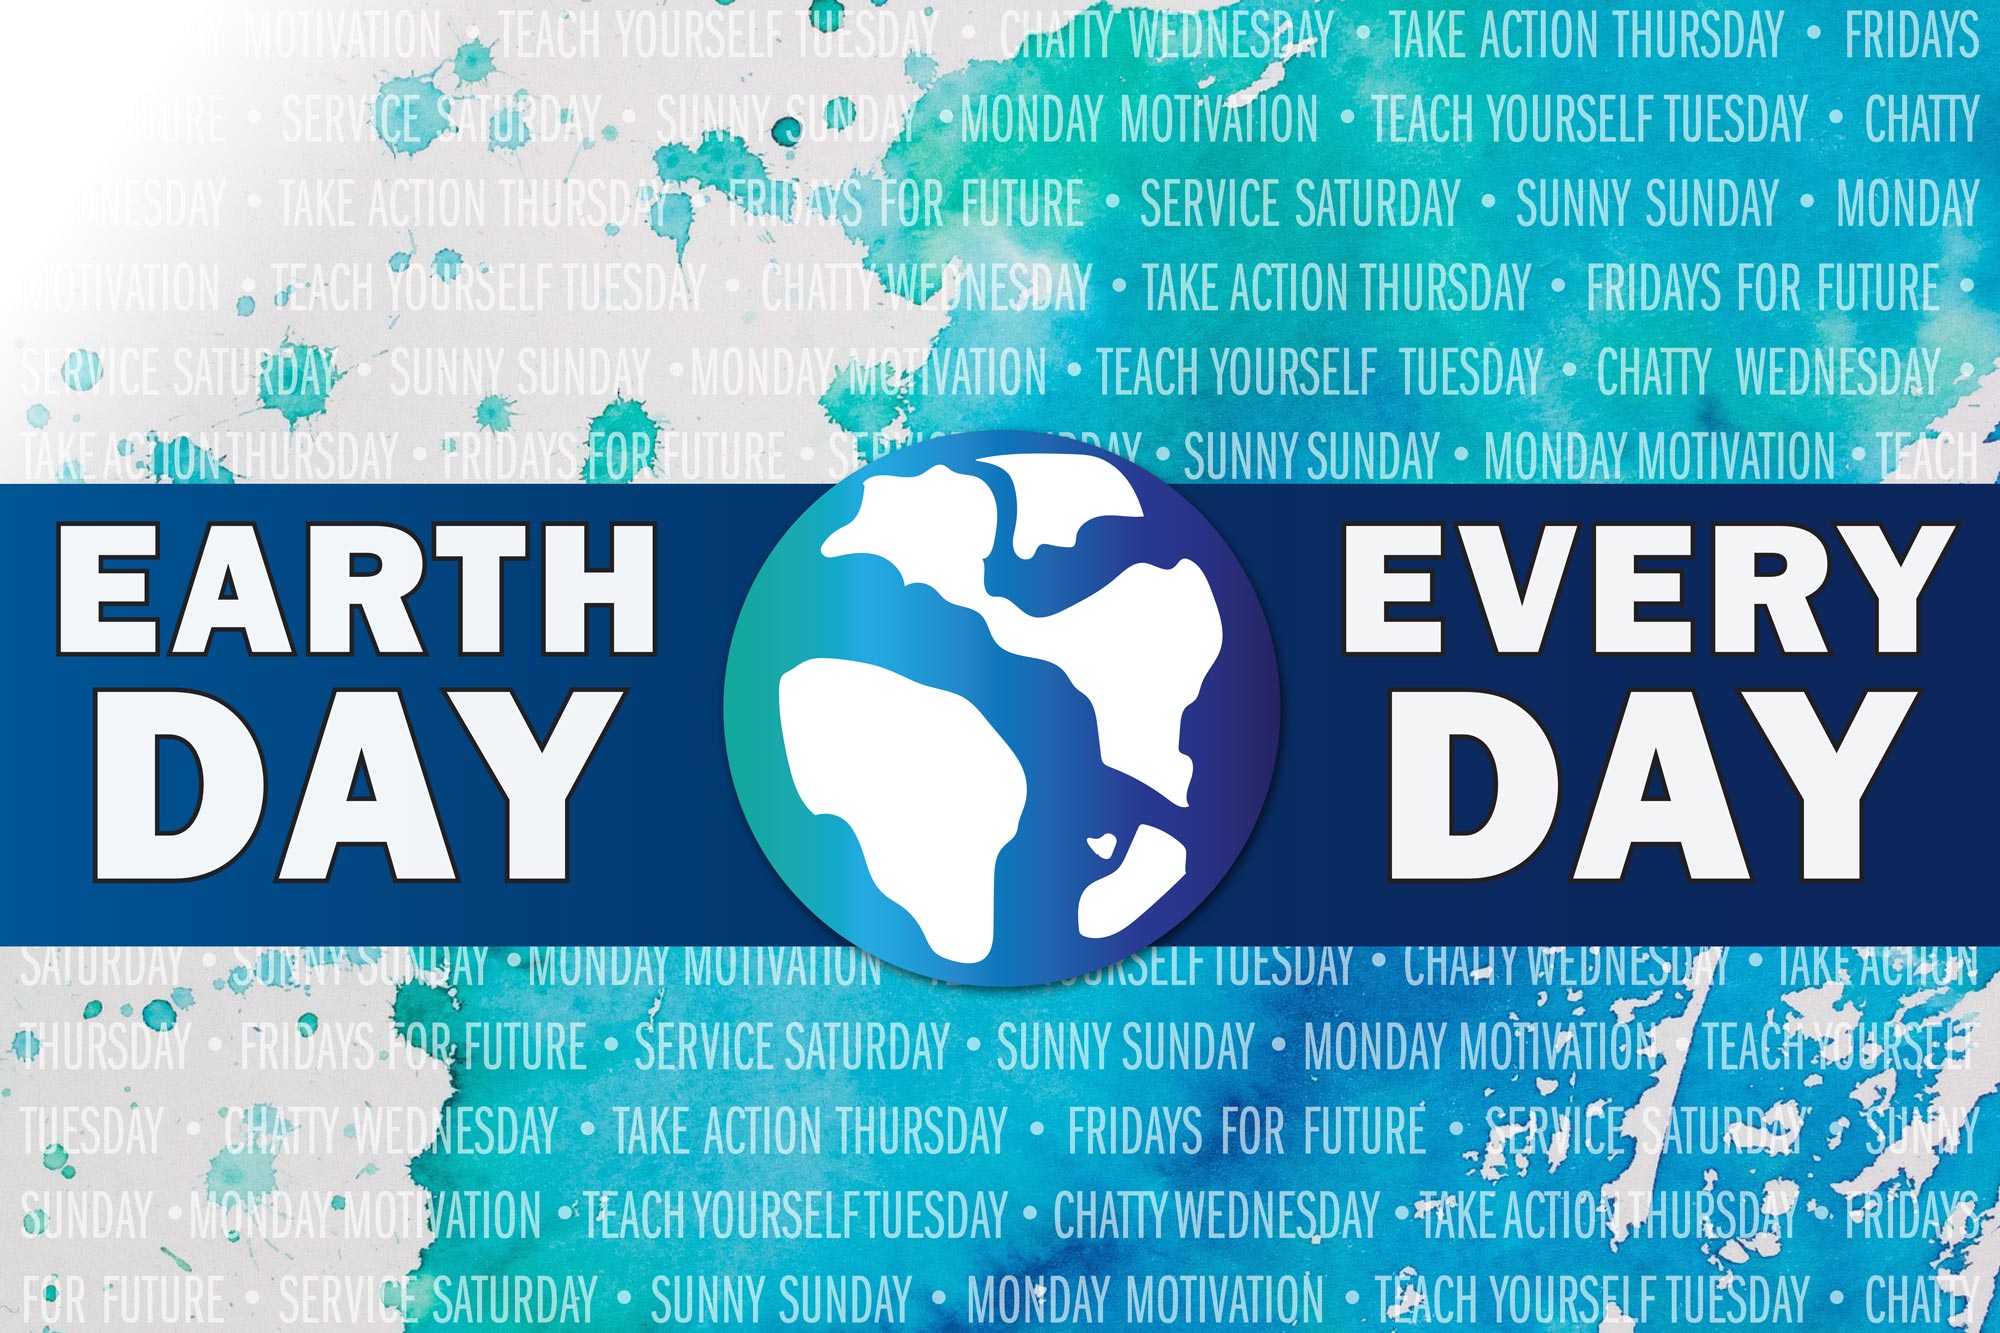 Image with text: Earth Day Every Day